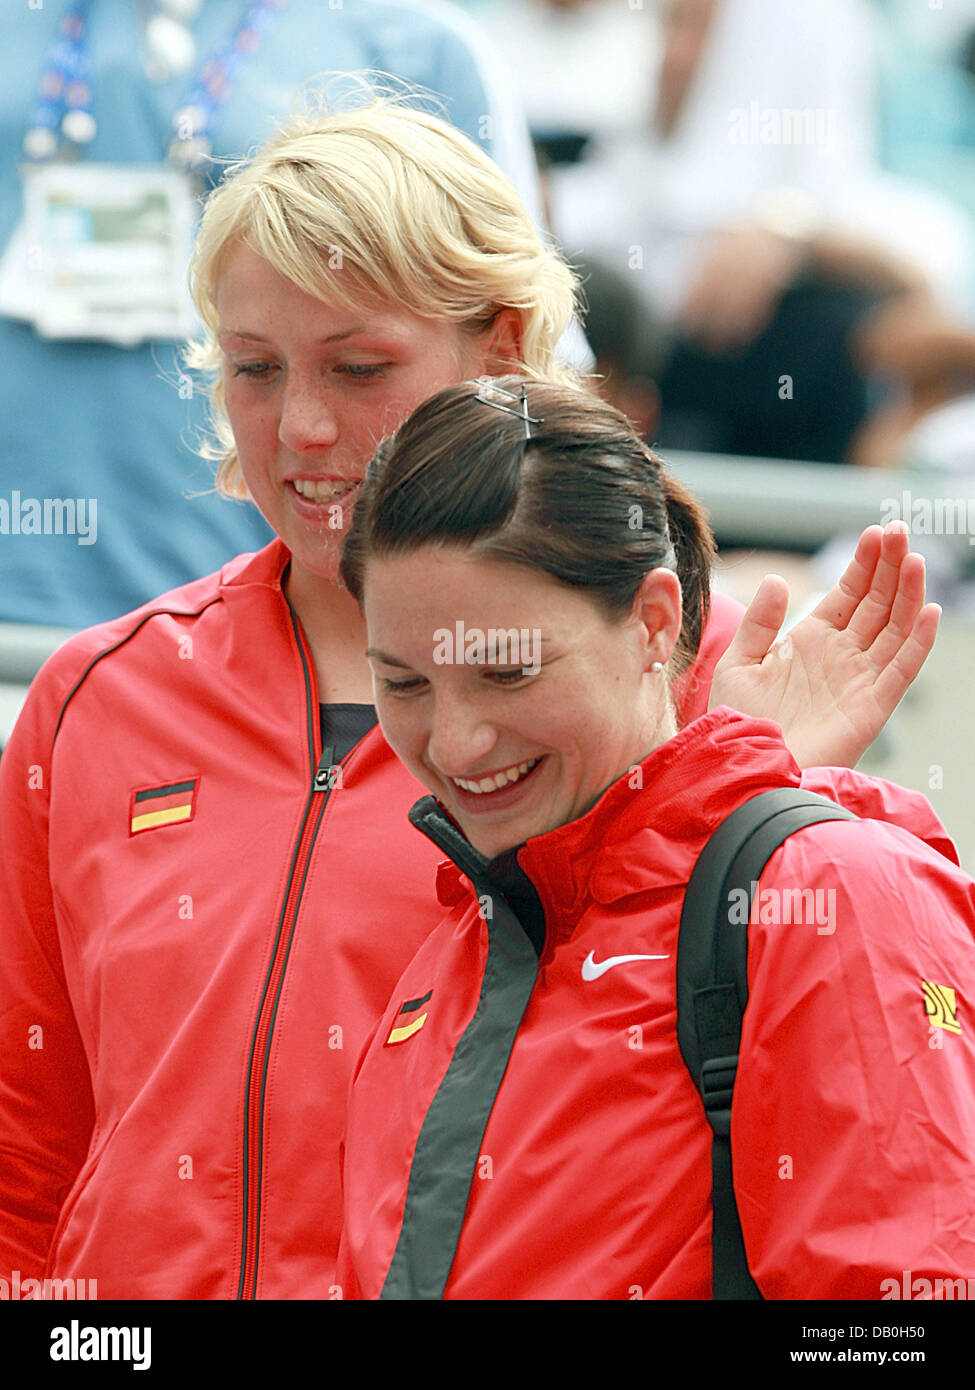 German athletes Christina Obergfoell (L) and Linda Stahl cheer after they qualified for the javelin throw final at the IAAF World Championships 2007 in Osaka, Japan, 29 August 2007. Photo: Gero Breloer Stock Photo